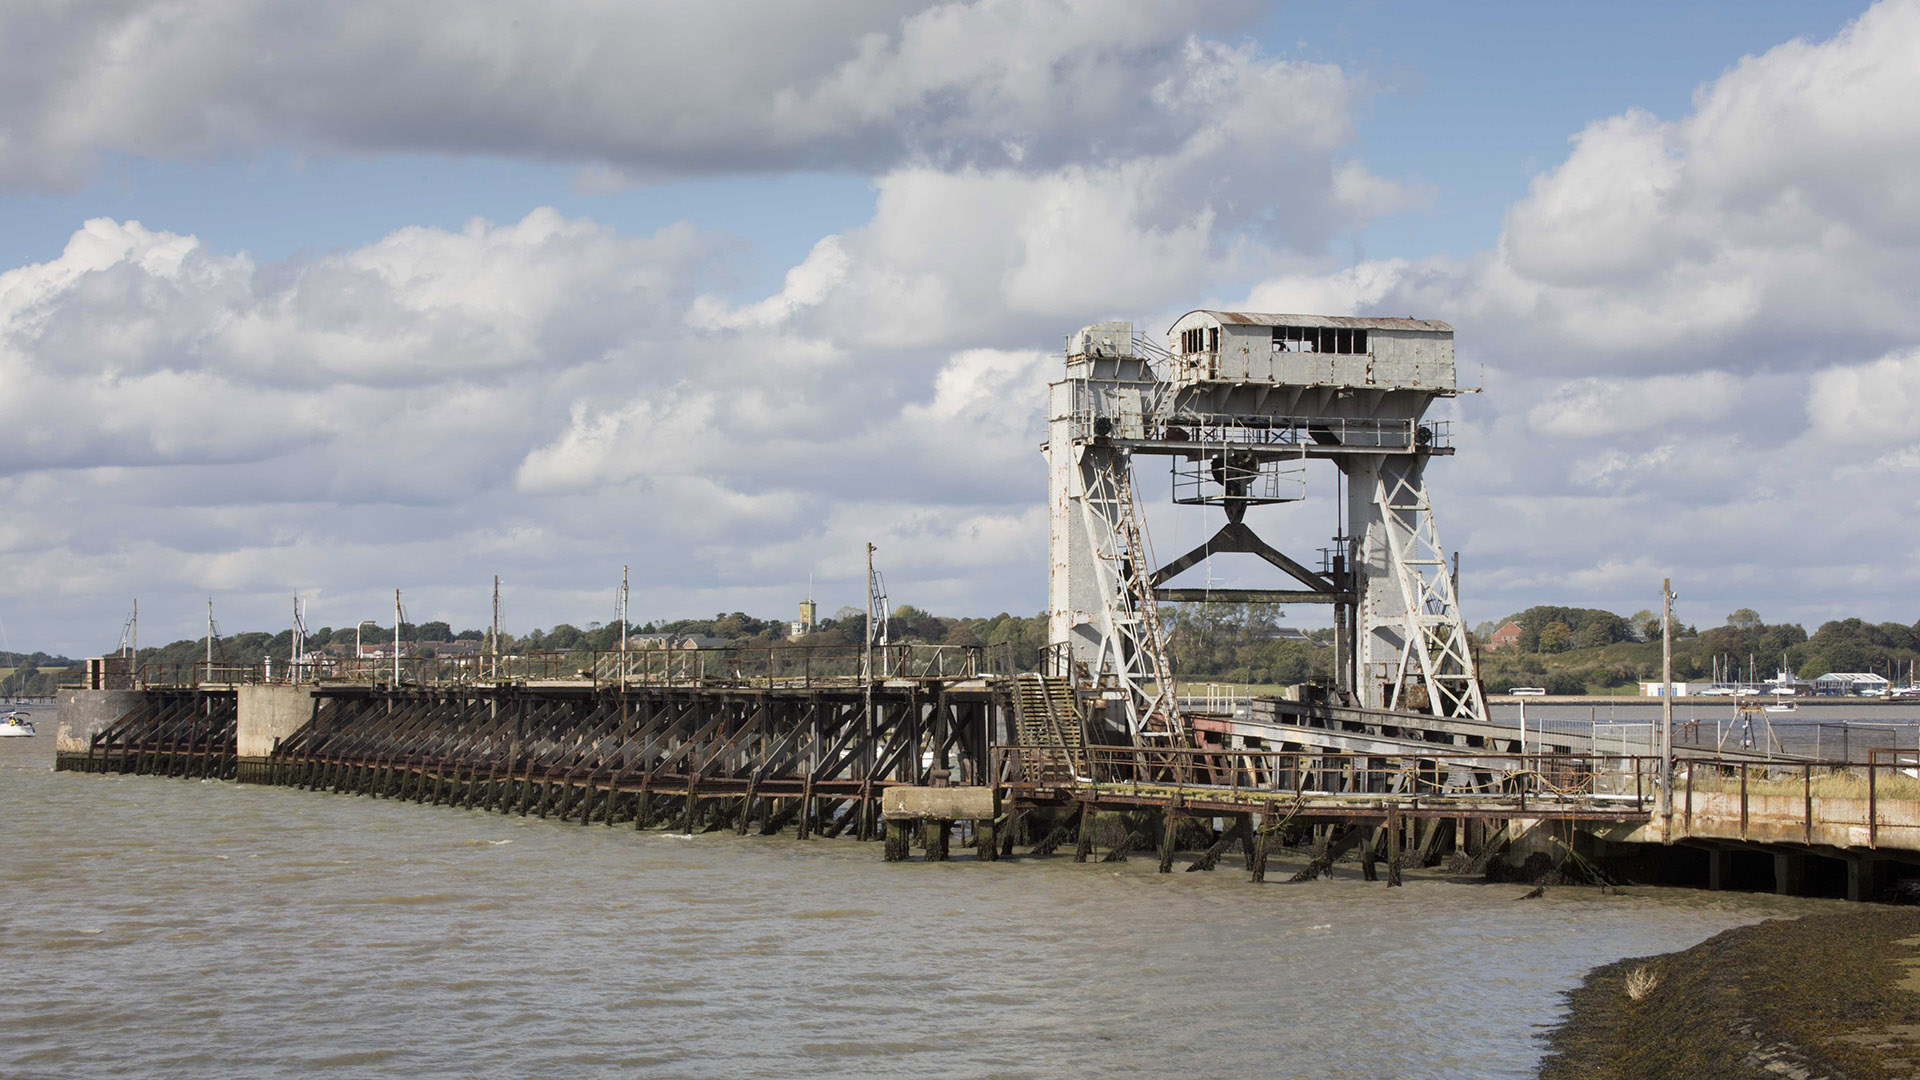 Harwich, Essex, this grey, twin-gantry, steel-framed roll-on/roll-off (Ro-Ro) bridge was erected at the Port of Richborough in 1916 to speed up the supply of war material to the western front. It was later moved to Harwich where it survives adjacent to a jetty, Listed Grade II.